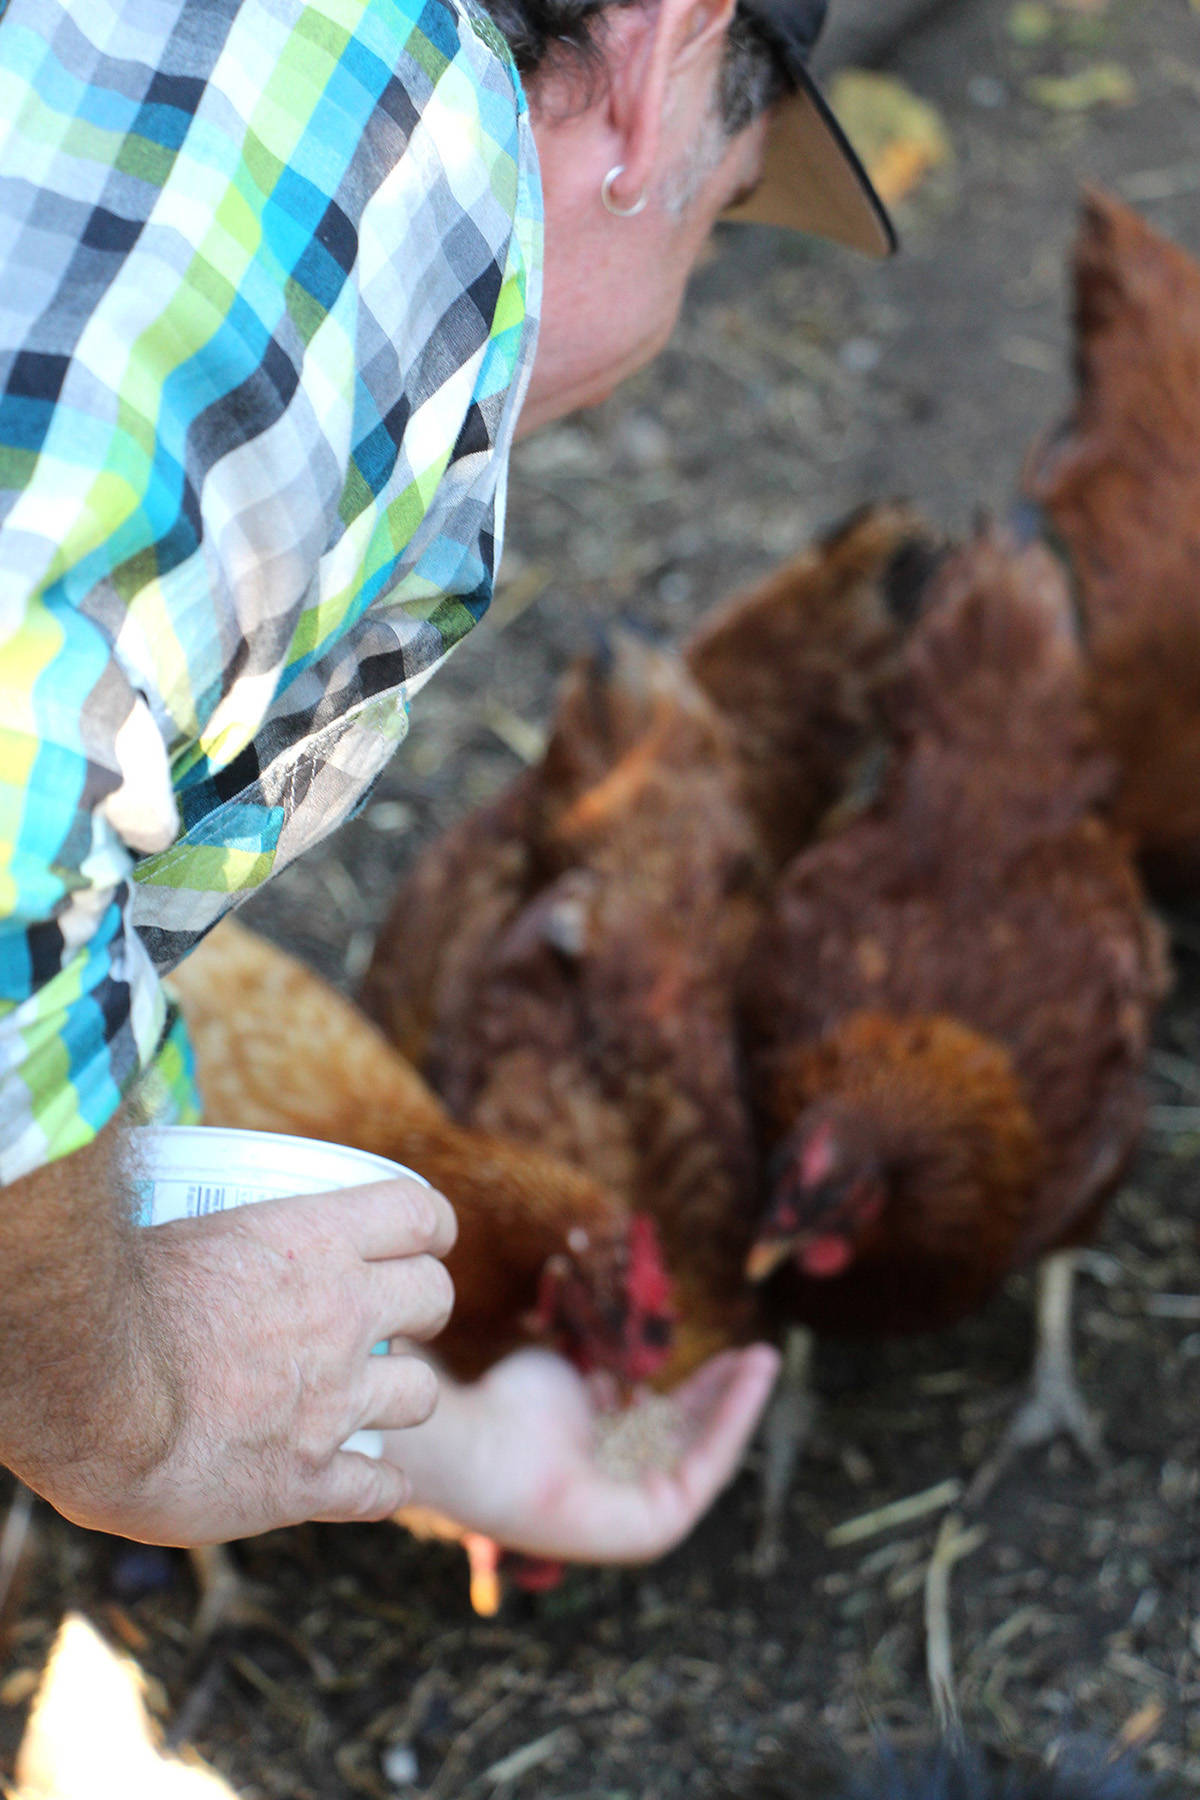 Rather than leaving food out for the chickens all day like he did when he first bought his coop, Andrew Moyer now feeds his hens at specific times according to what they need. This reduces the amount of food around for pests to feed on. (Lauren Boothby/VICTORIA NEWS)